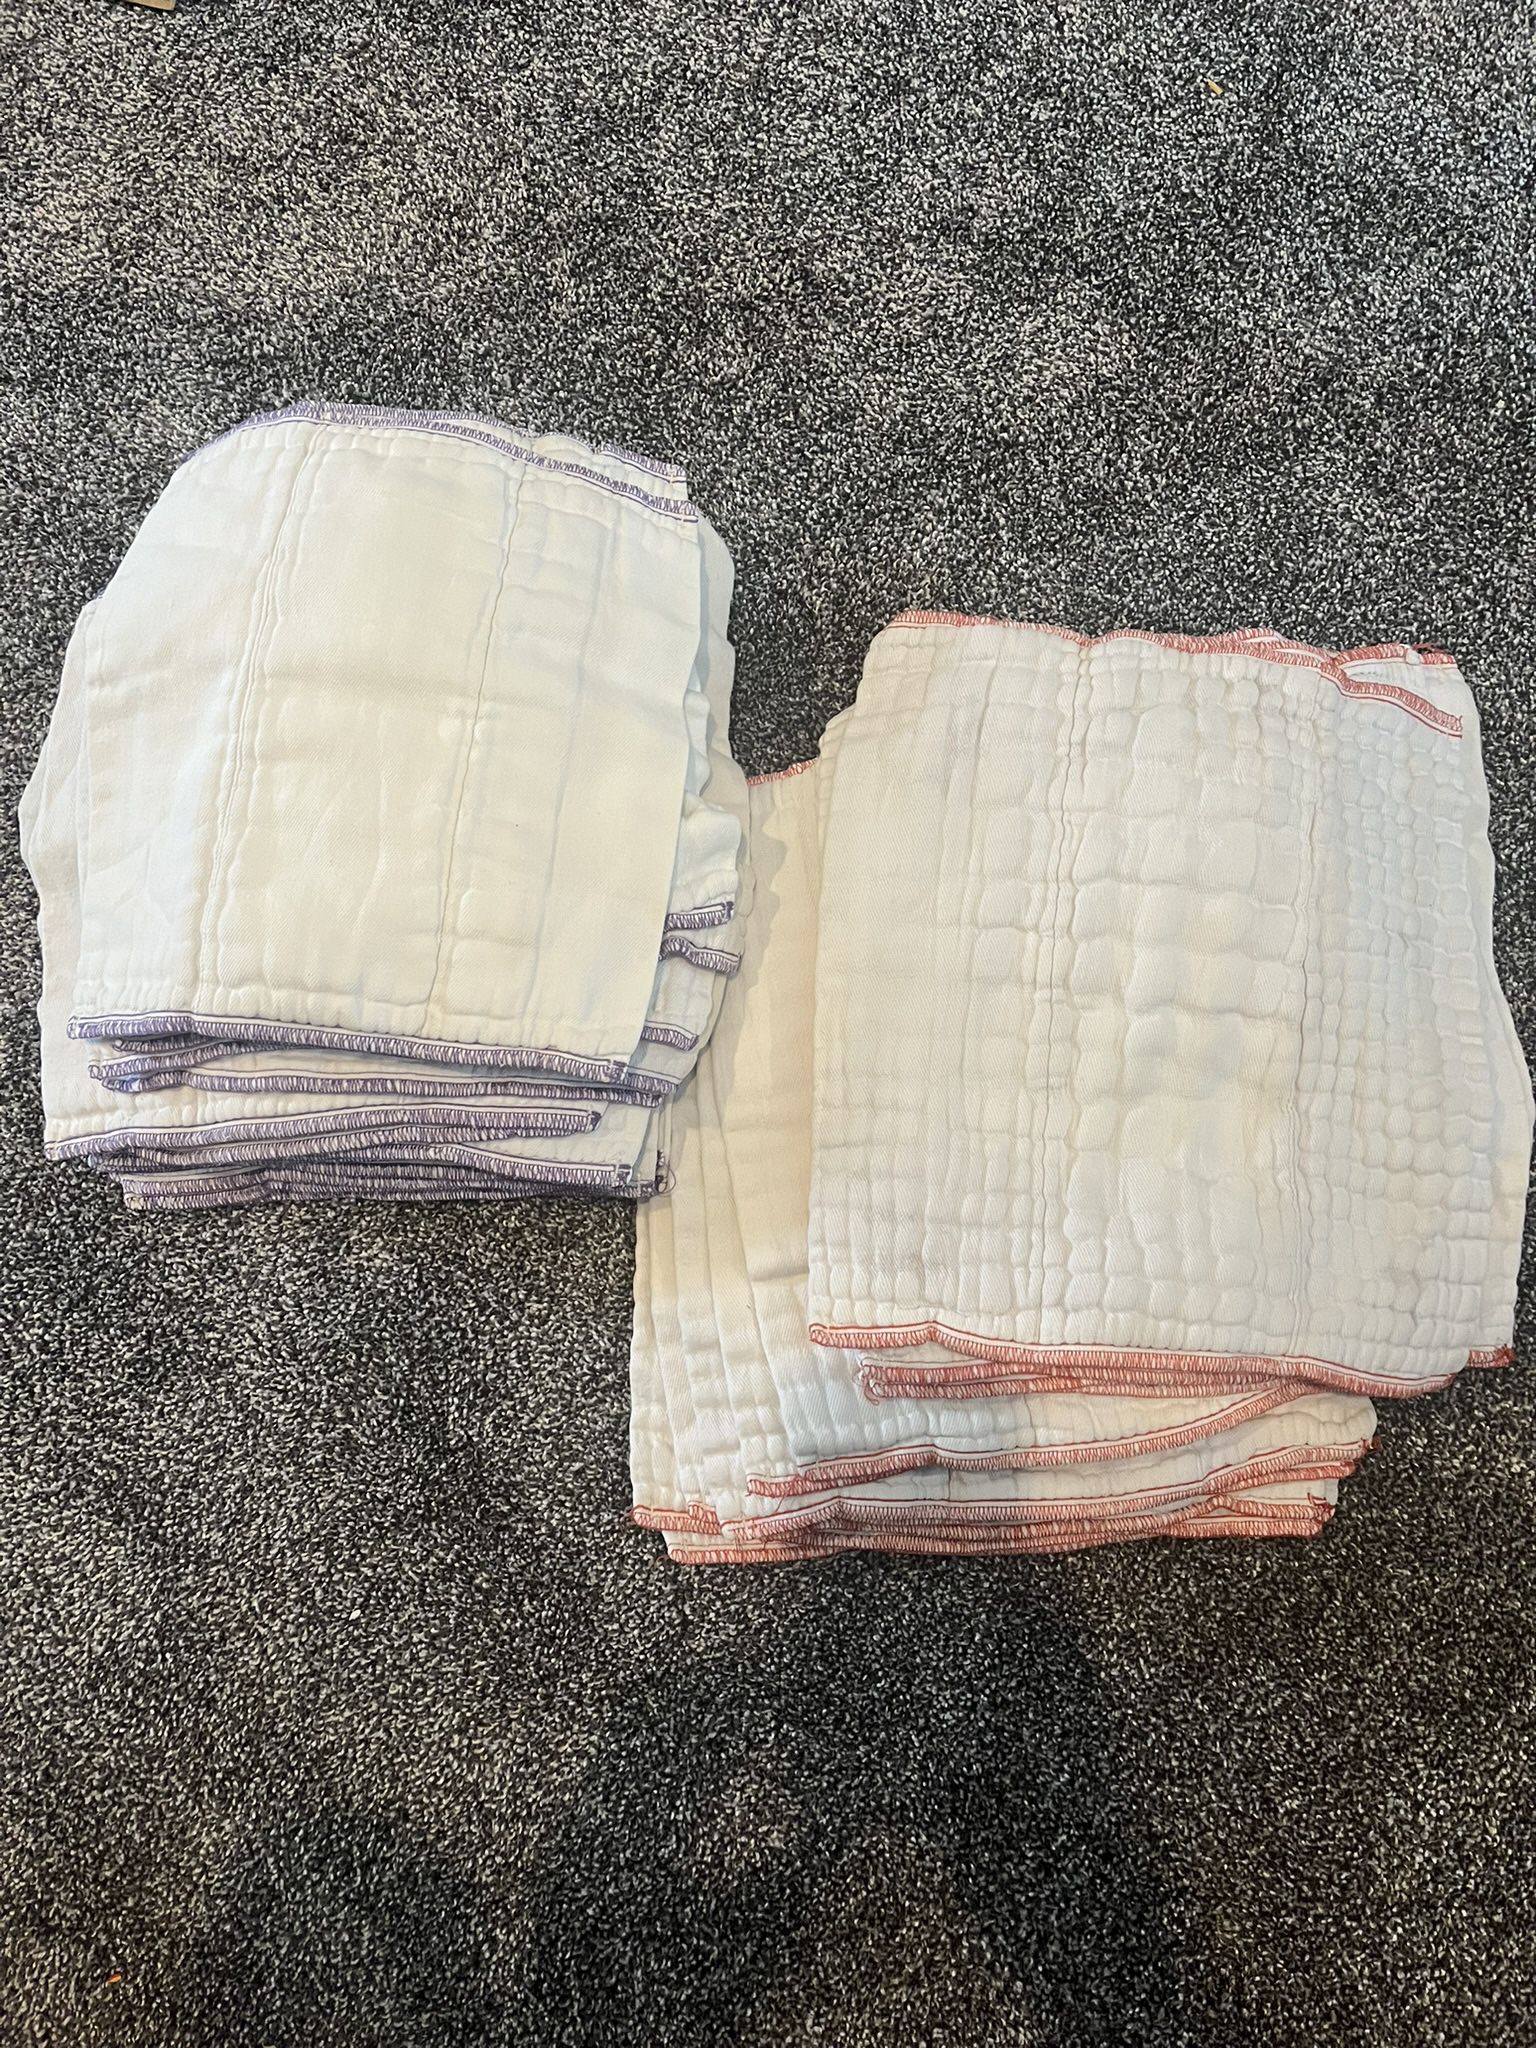 CLOTH-EEZ PREFOLD DIAPERS - NATURAL UNBLEACHED Lot of 29